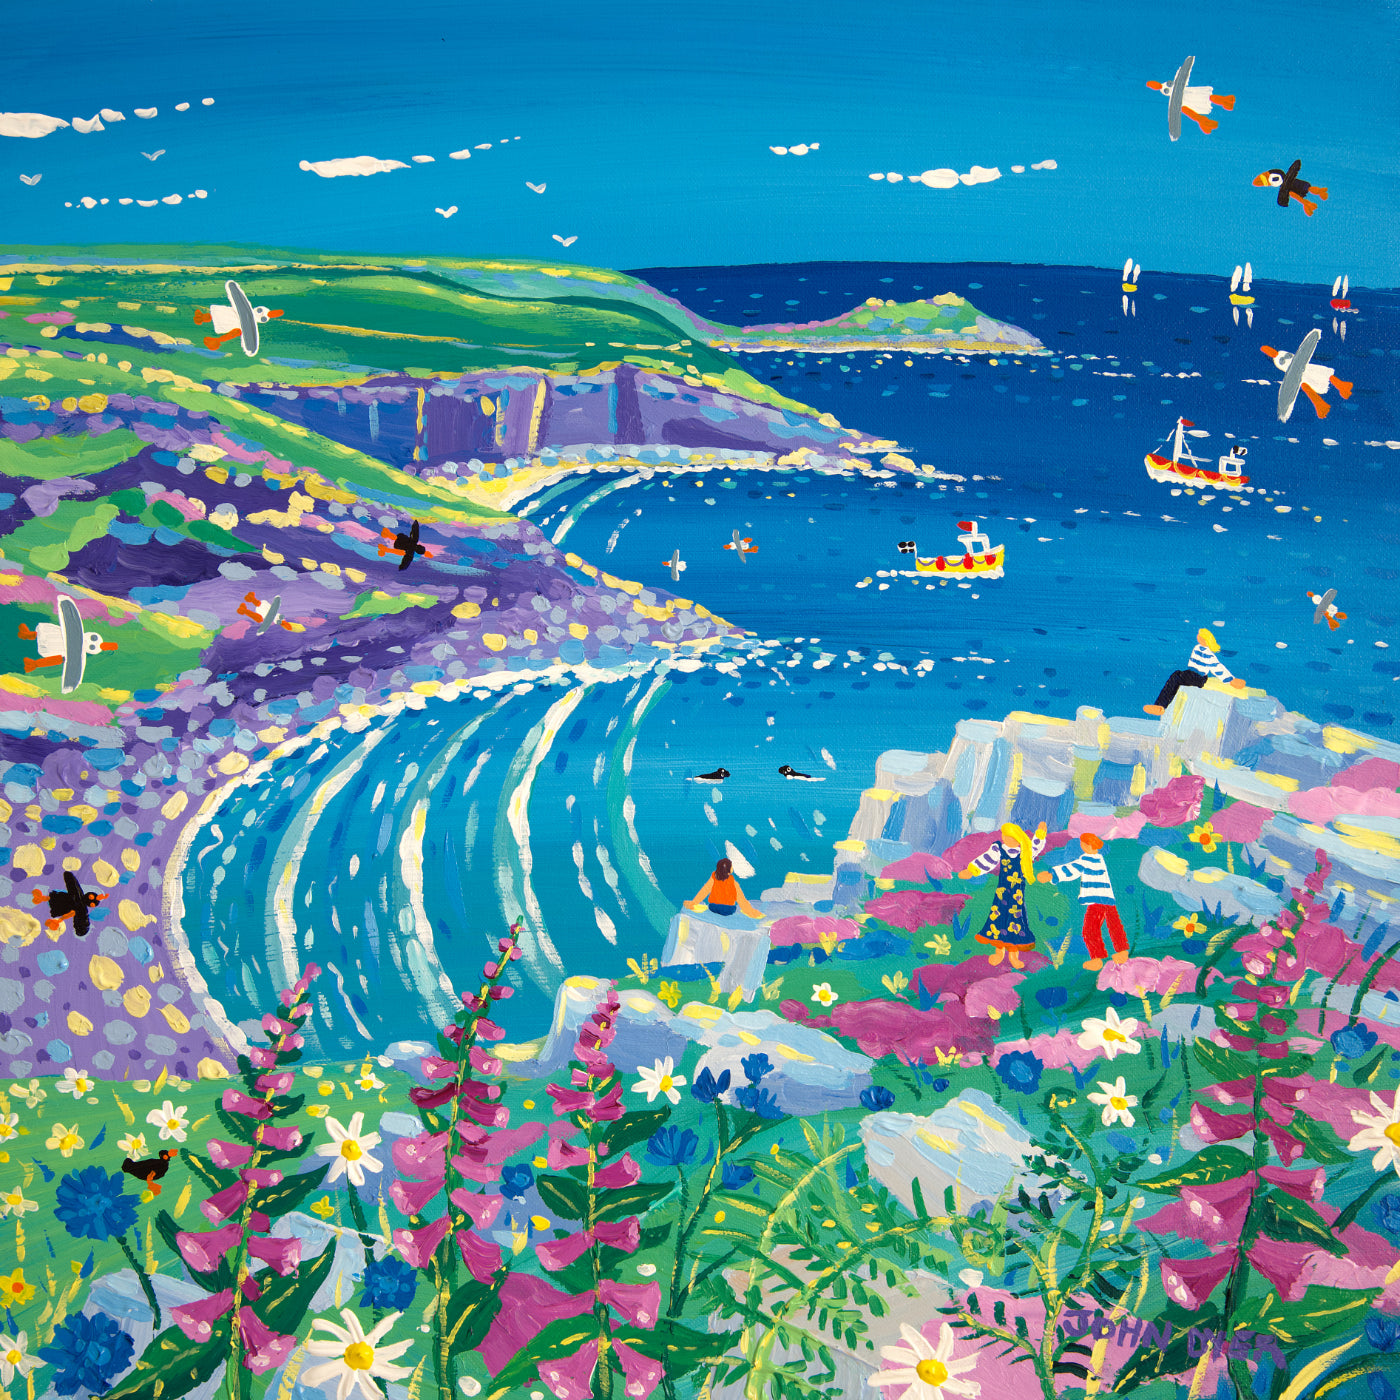 The stunning coastline at Zennor Head has been captured by artist John Dyer in this new Cornish painting. Foxgloves and ferns fill the foreground and a family relax on the rugged rocks beside the cliff listening to the sea as it gently laps onto the rocks below. Seals, seagulls and fishing boats complete this delightful painting.